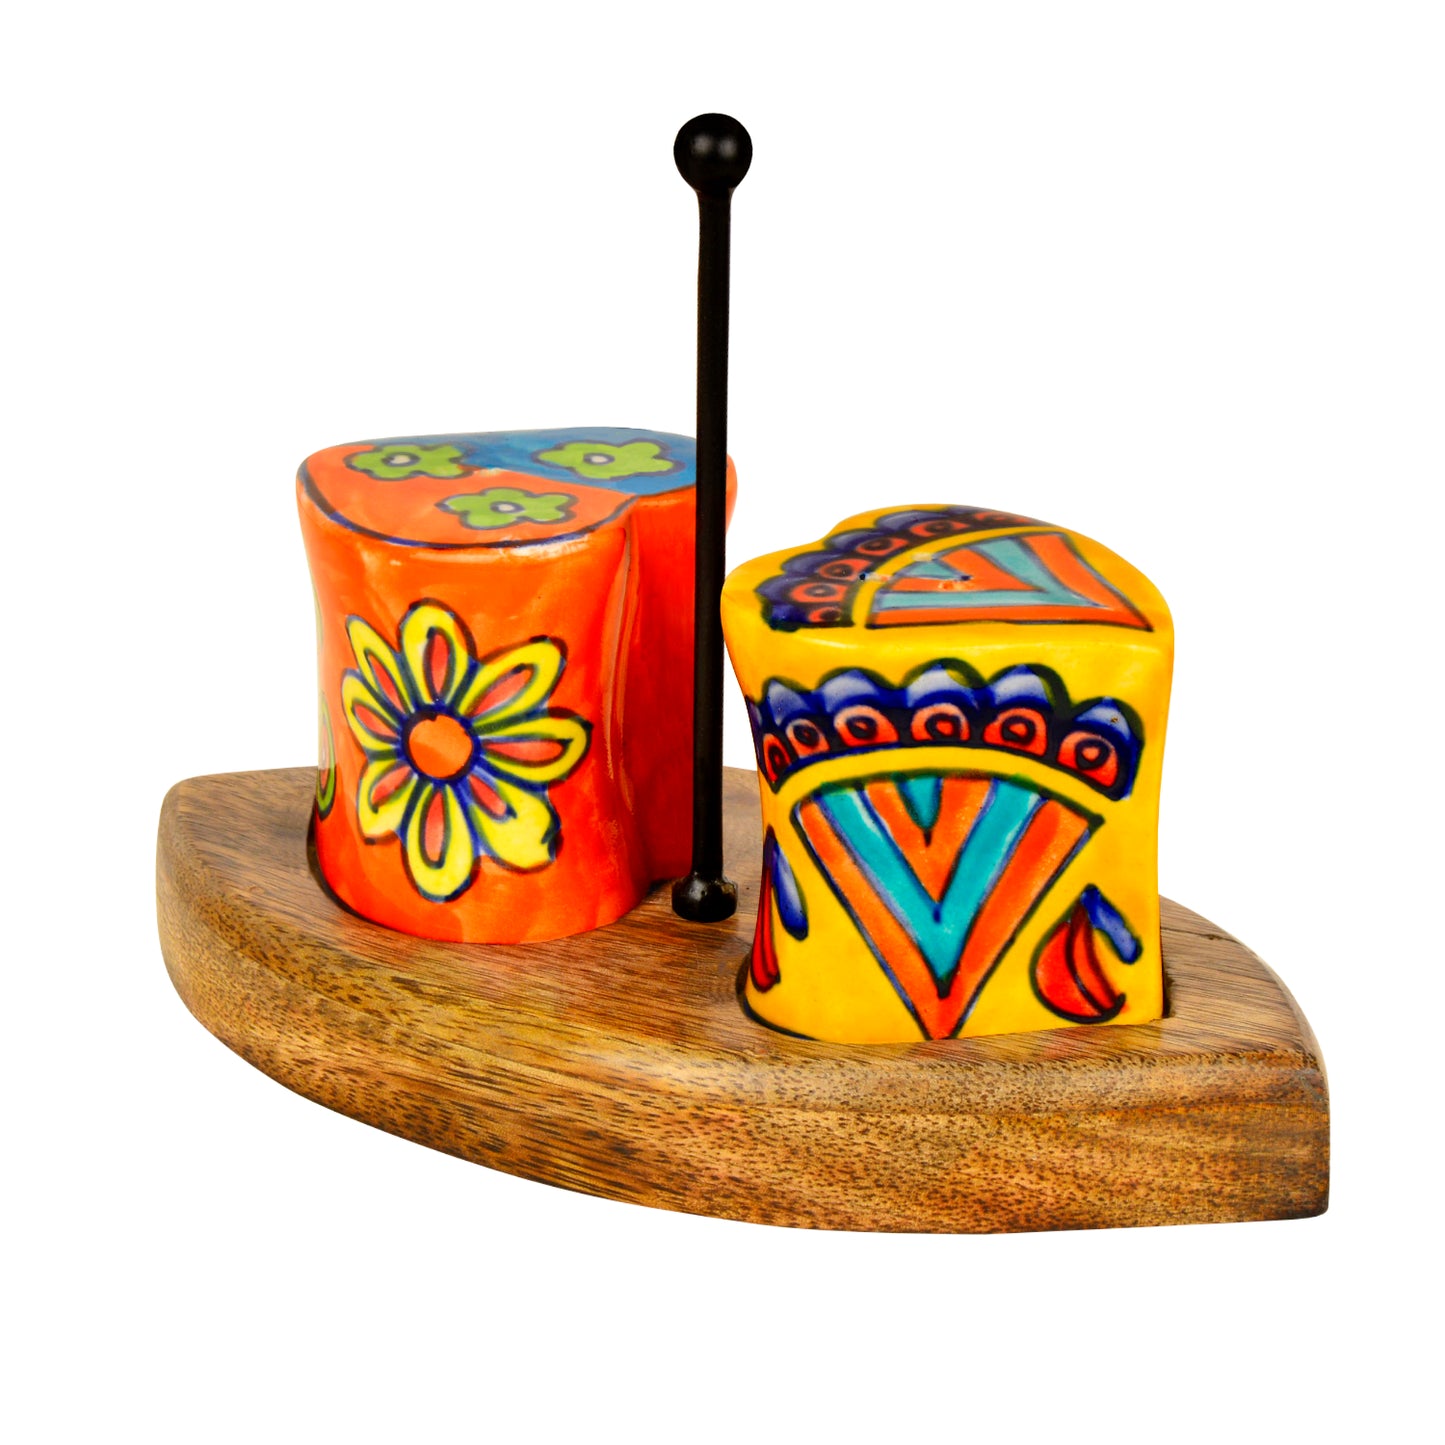 Handpainted Floral Ceramic Salt and Pepper Shaker with Stand